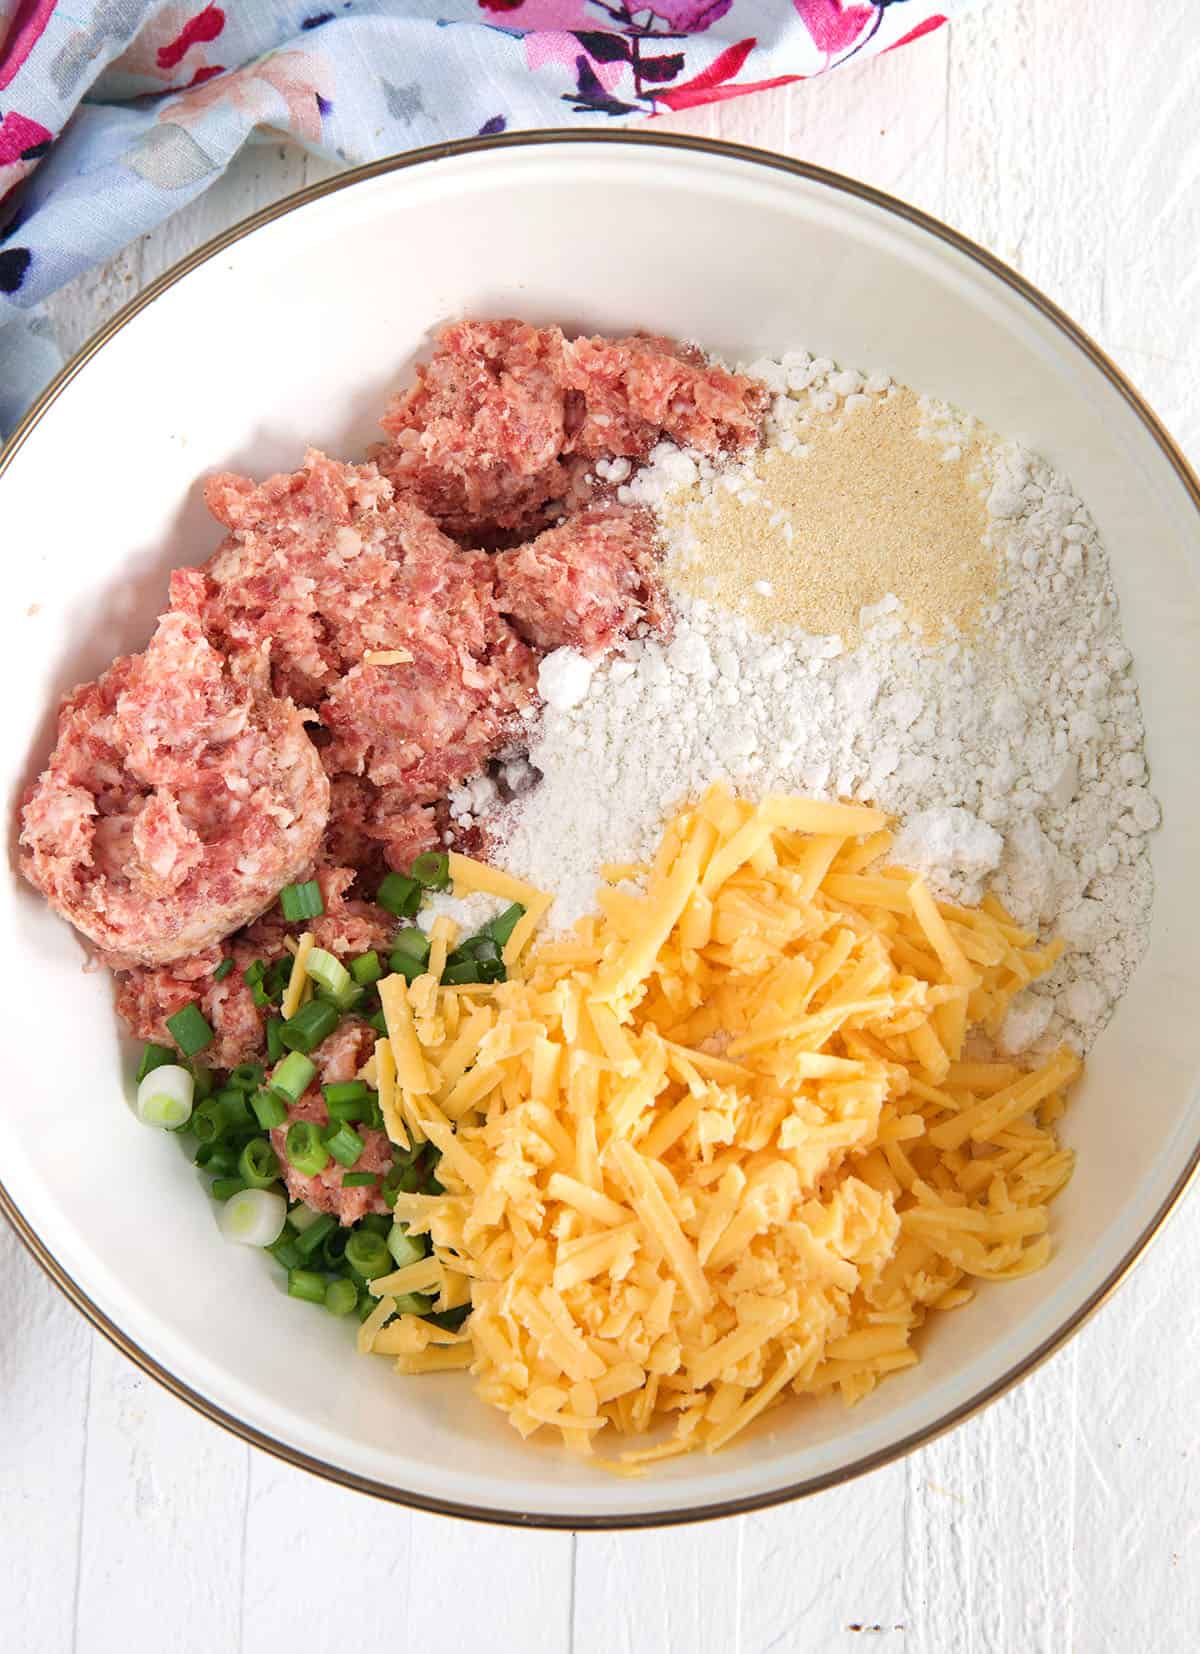 The ingredients for sausage balls are placed in a white mixing bowl.